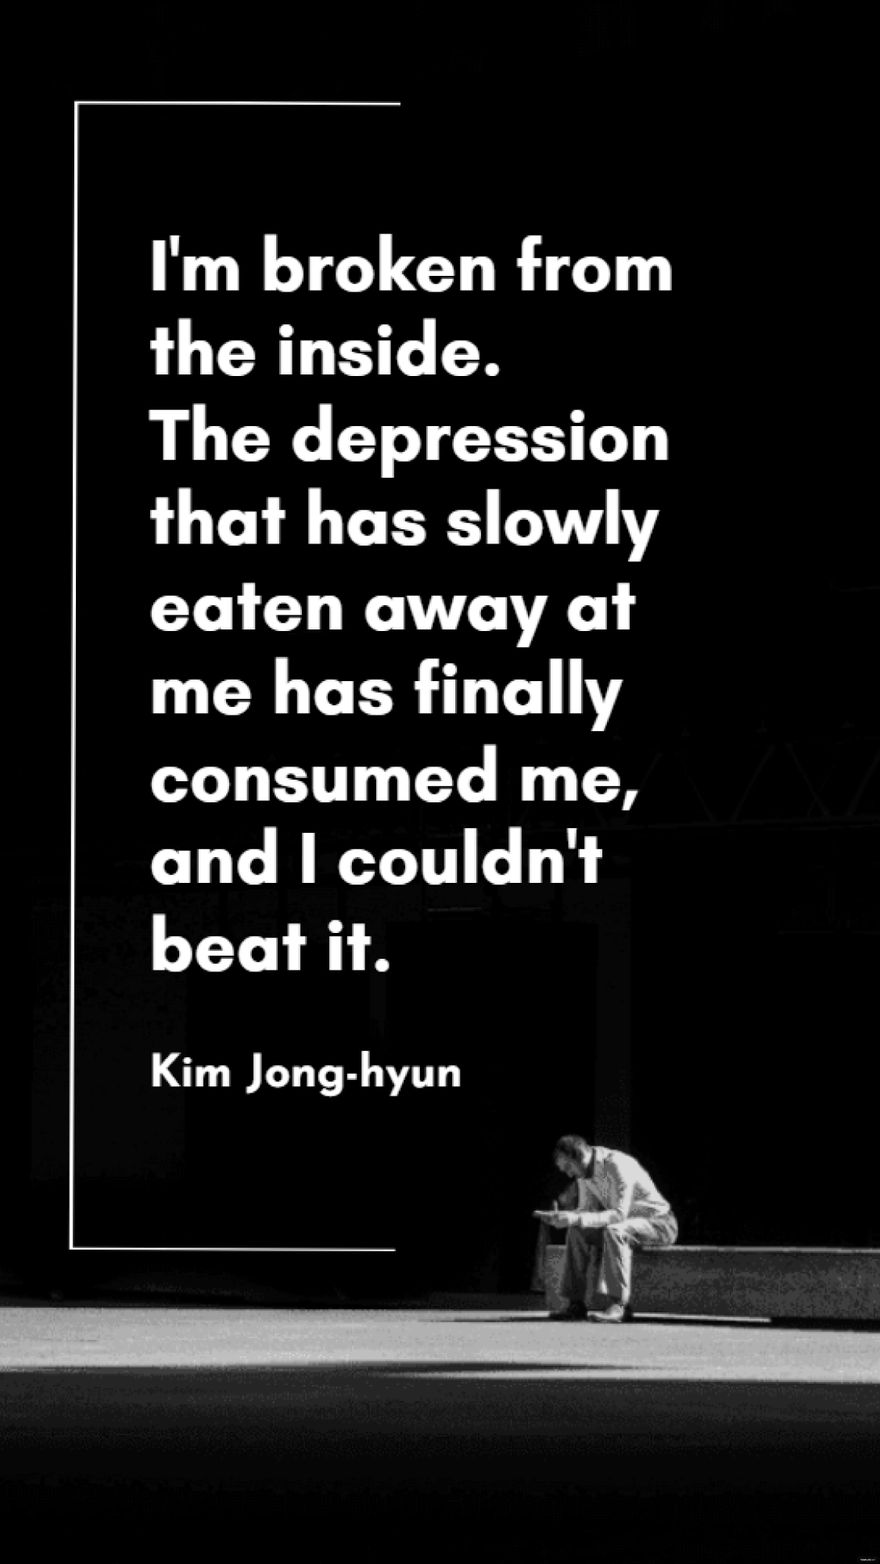 Kim Jong-hyun - I'm broken from the inside. The depression that has slowly eaten away at me has finally consumed me, and I couldn't beat it.